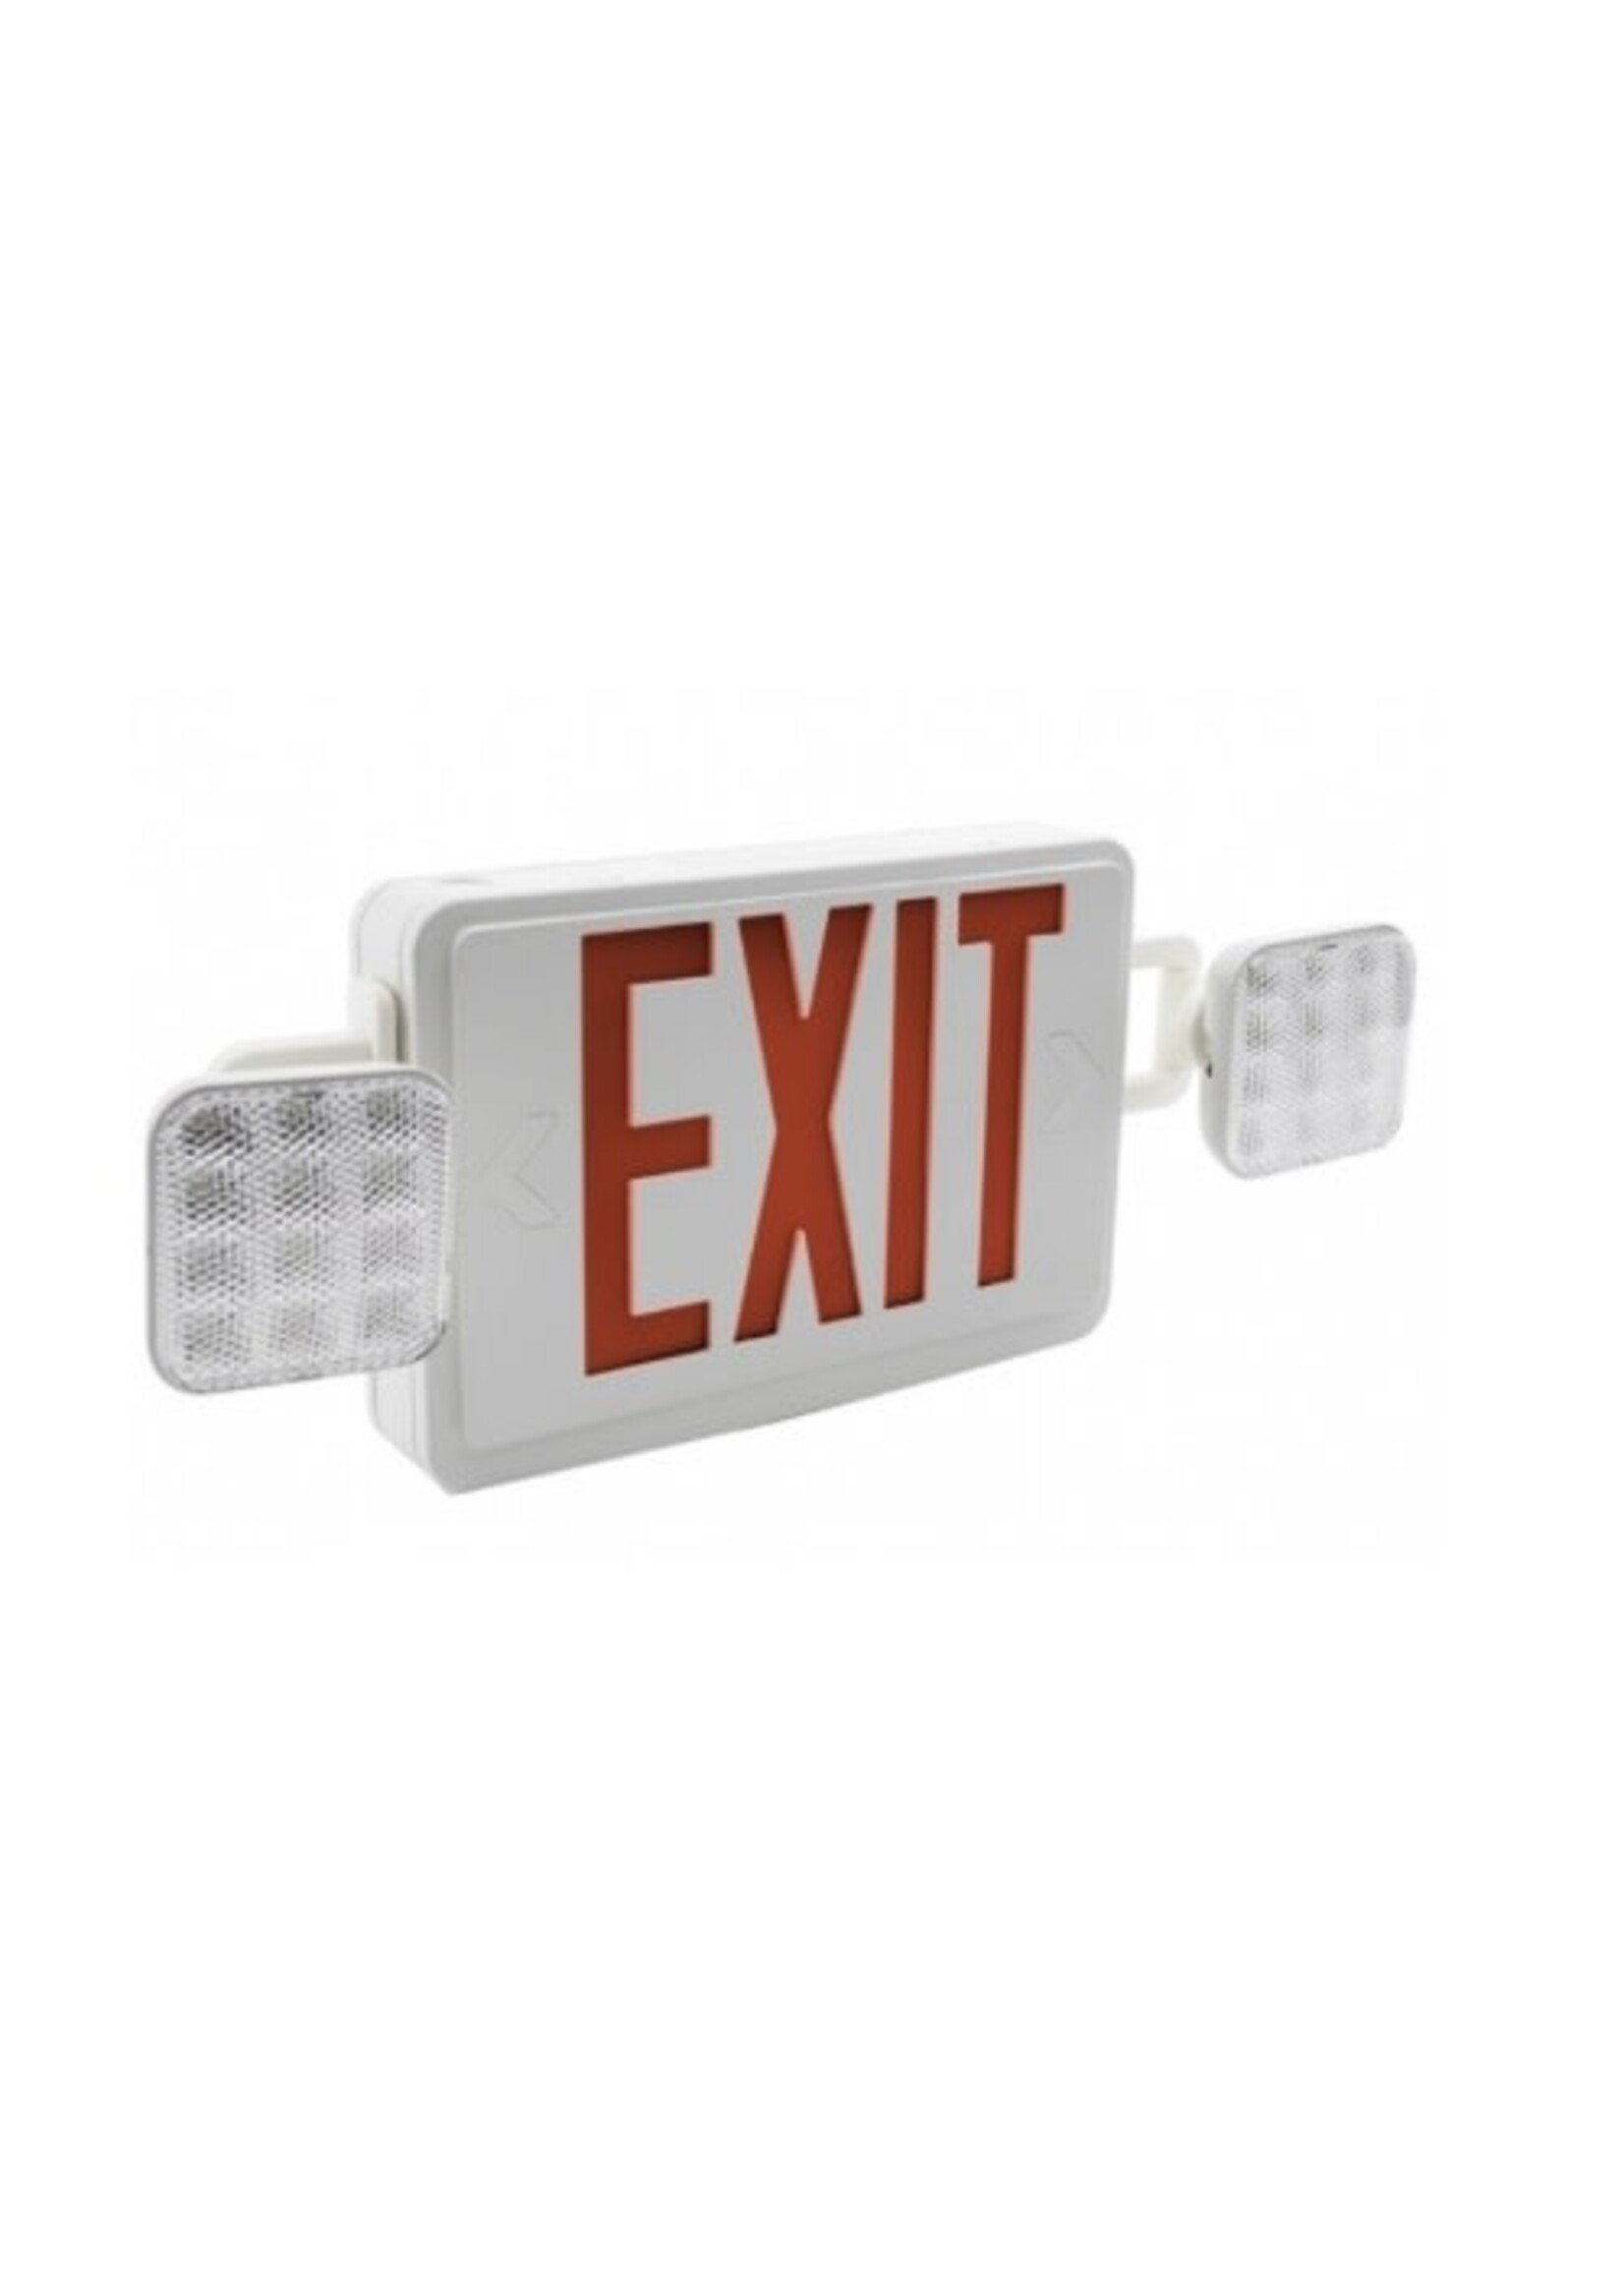 LEDVANCE 60759 SYLVANIA EXIT / SECURITY LIGHT COMBO LED 120-277V - RED EXIT